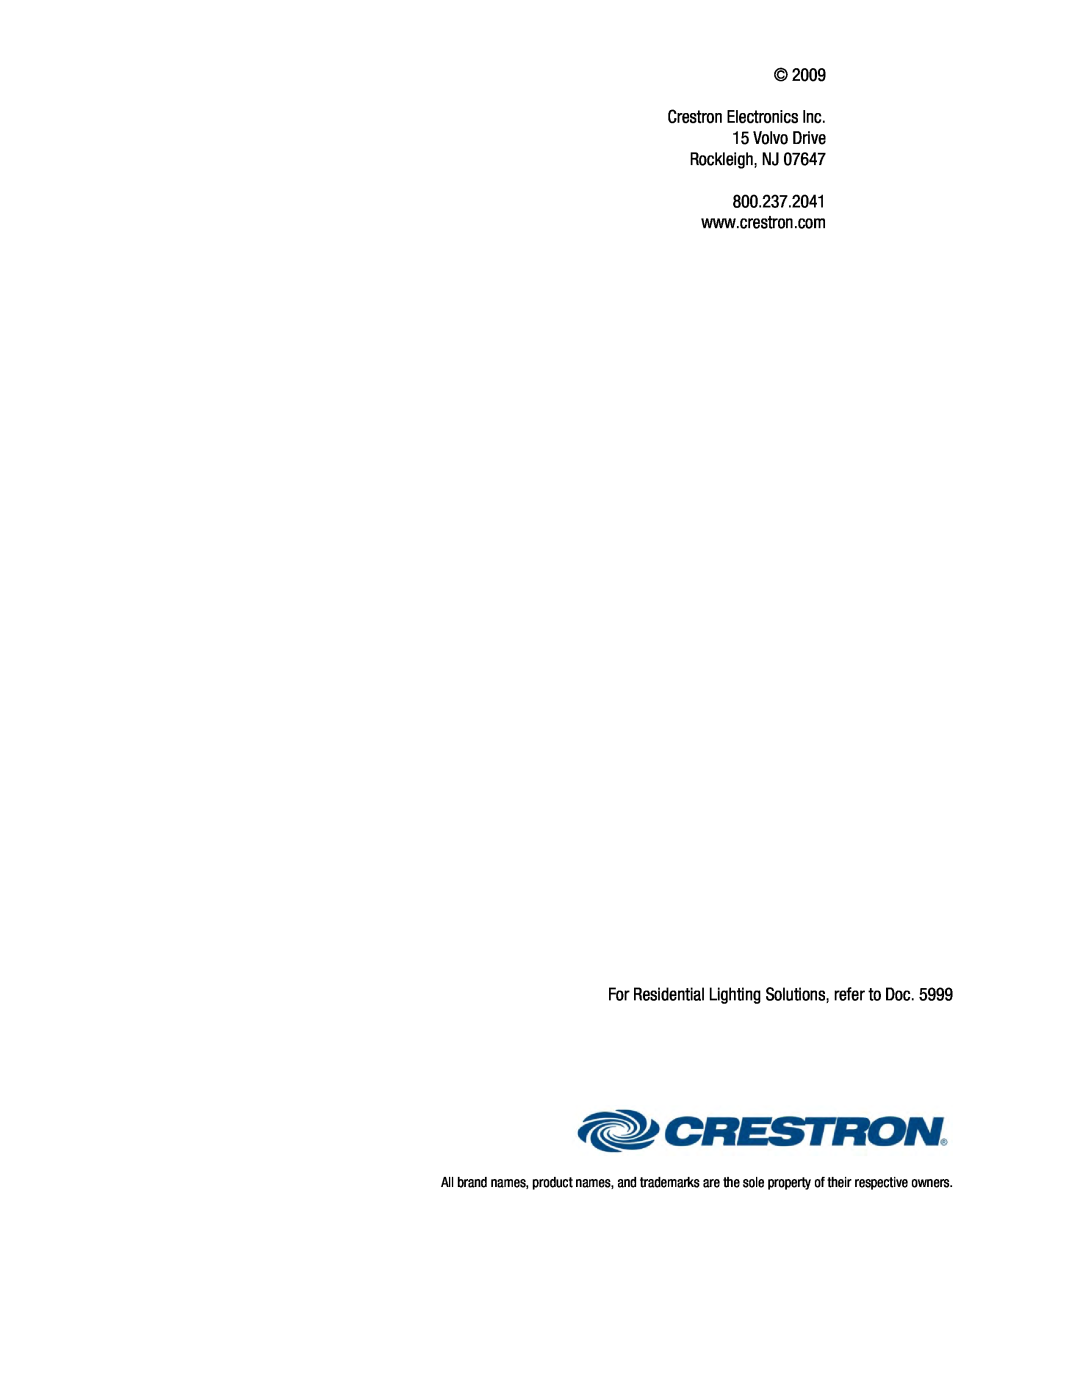 Crestron electronic GLPS-SW-FT Crestron Electronics Inc 15 Volvo Drive, For Residential Lighting Solutions, refer to Doc 